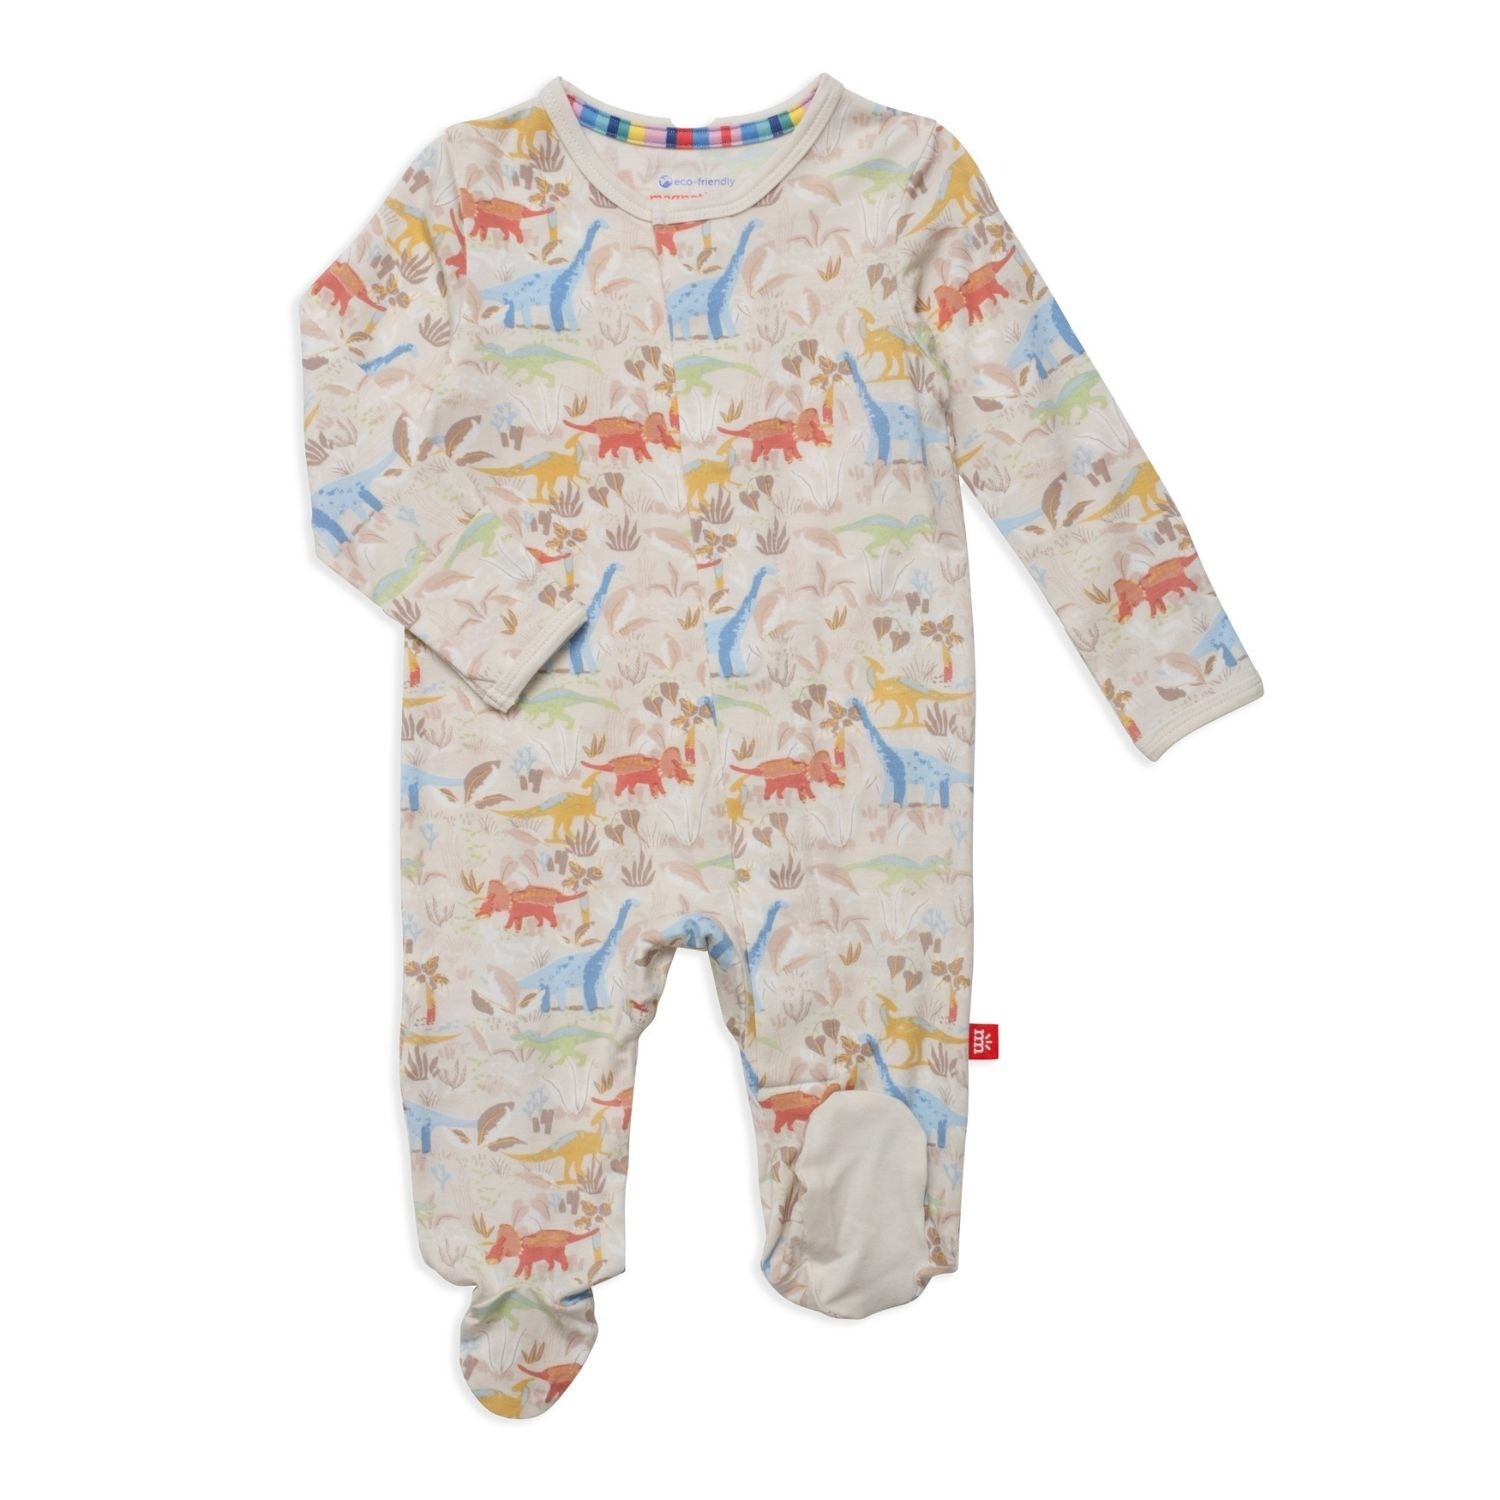 Magnetic Me ext-roar-dinary modal magnetic footie - 0-3 Months